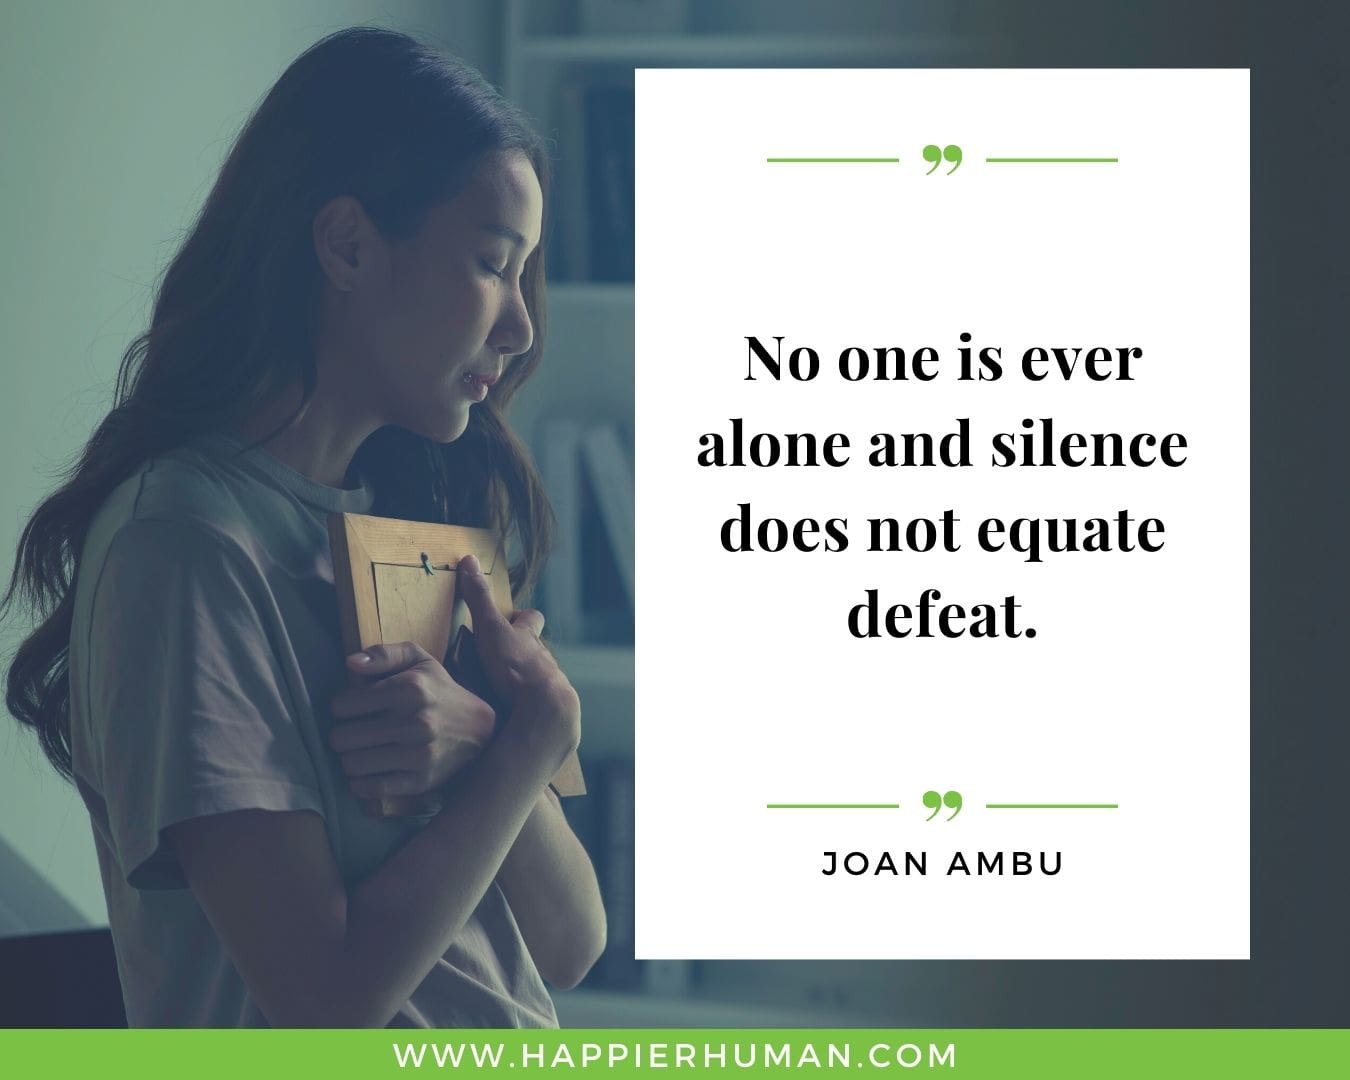 Loneliness Quotes - “No one is ever alone and silence does not equate defeat.” – Joan Ambu